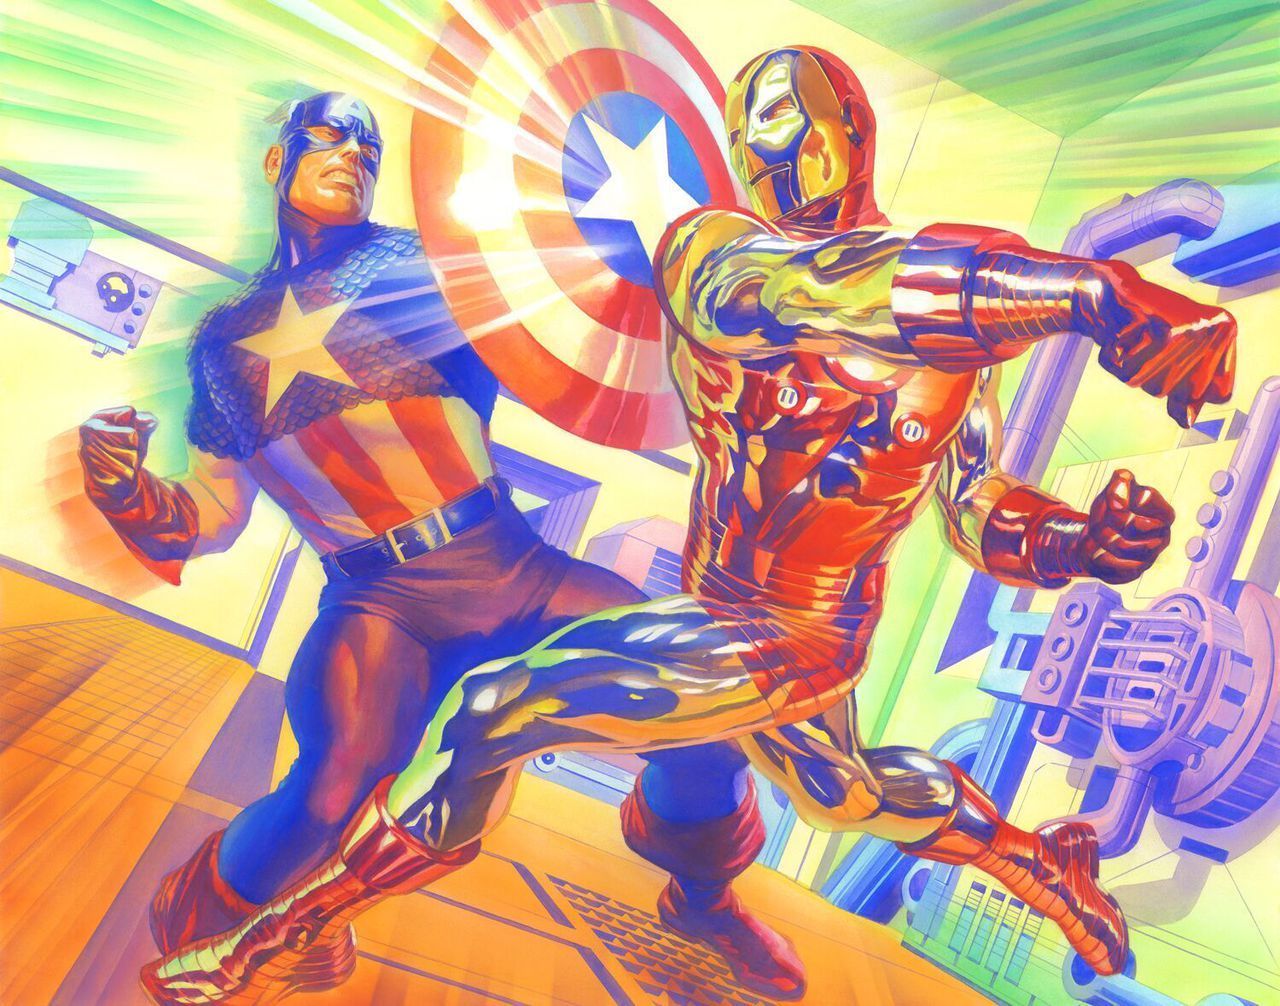  Captain America and Iron Man in battle.